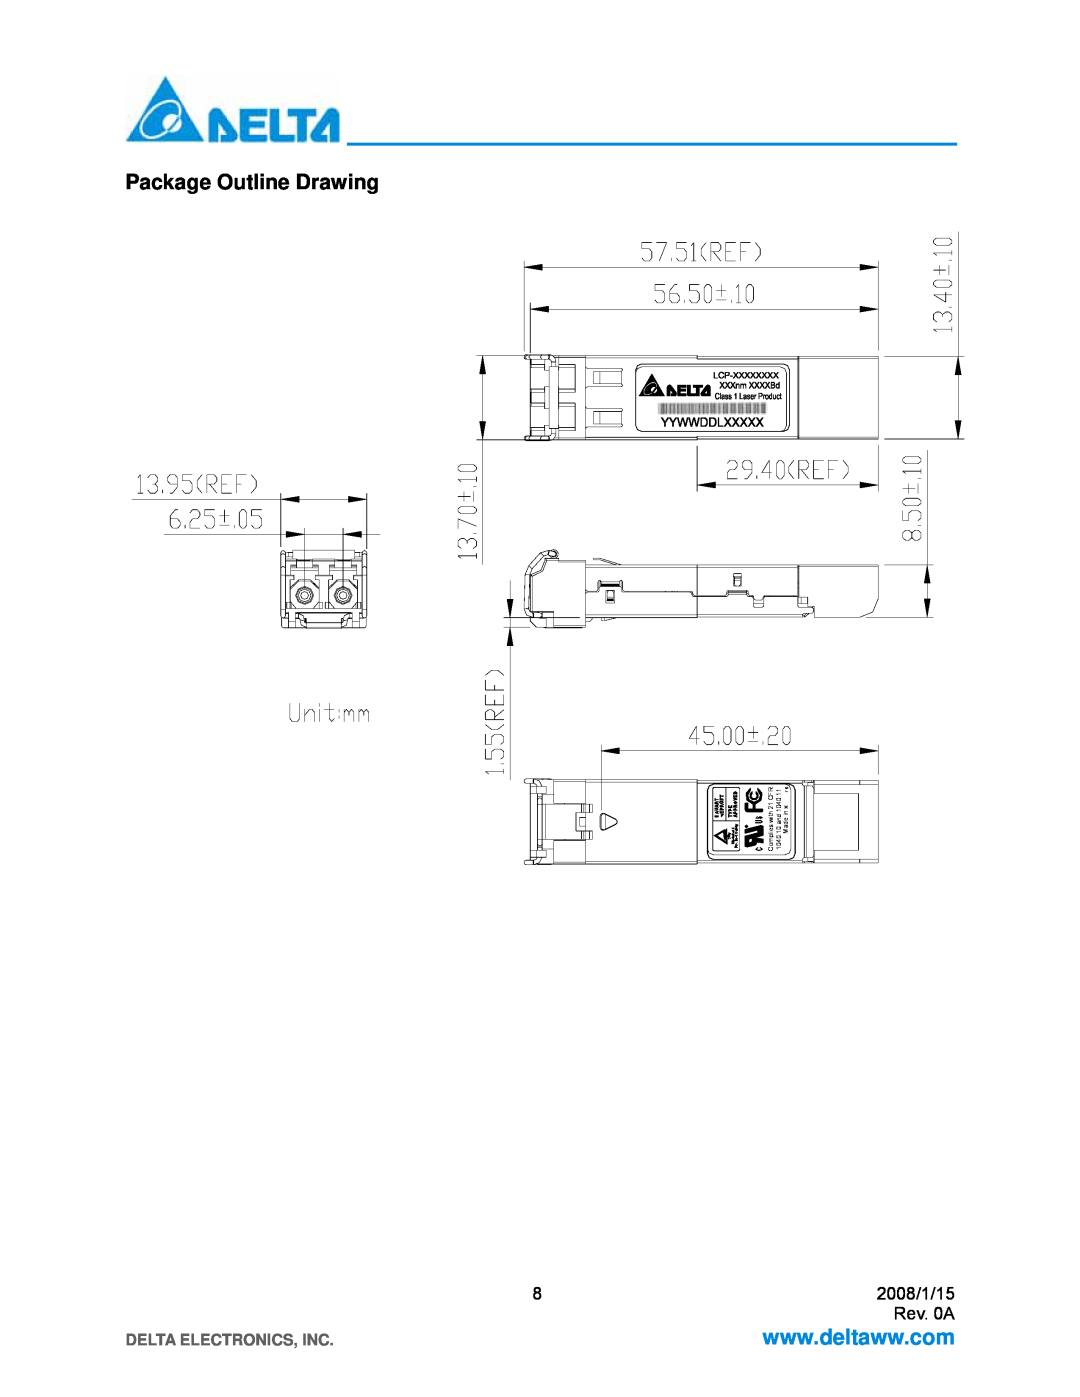 Delta Electronics LCP-1250 CWDM manual Package Outline Drawing, Delta Electronics, Inc 